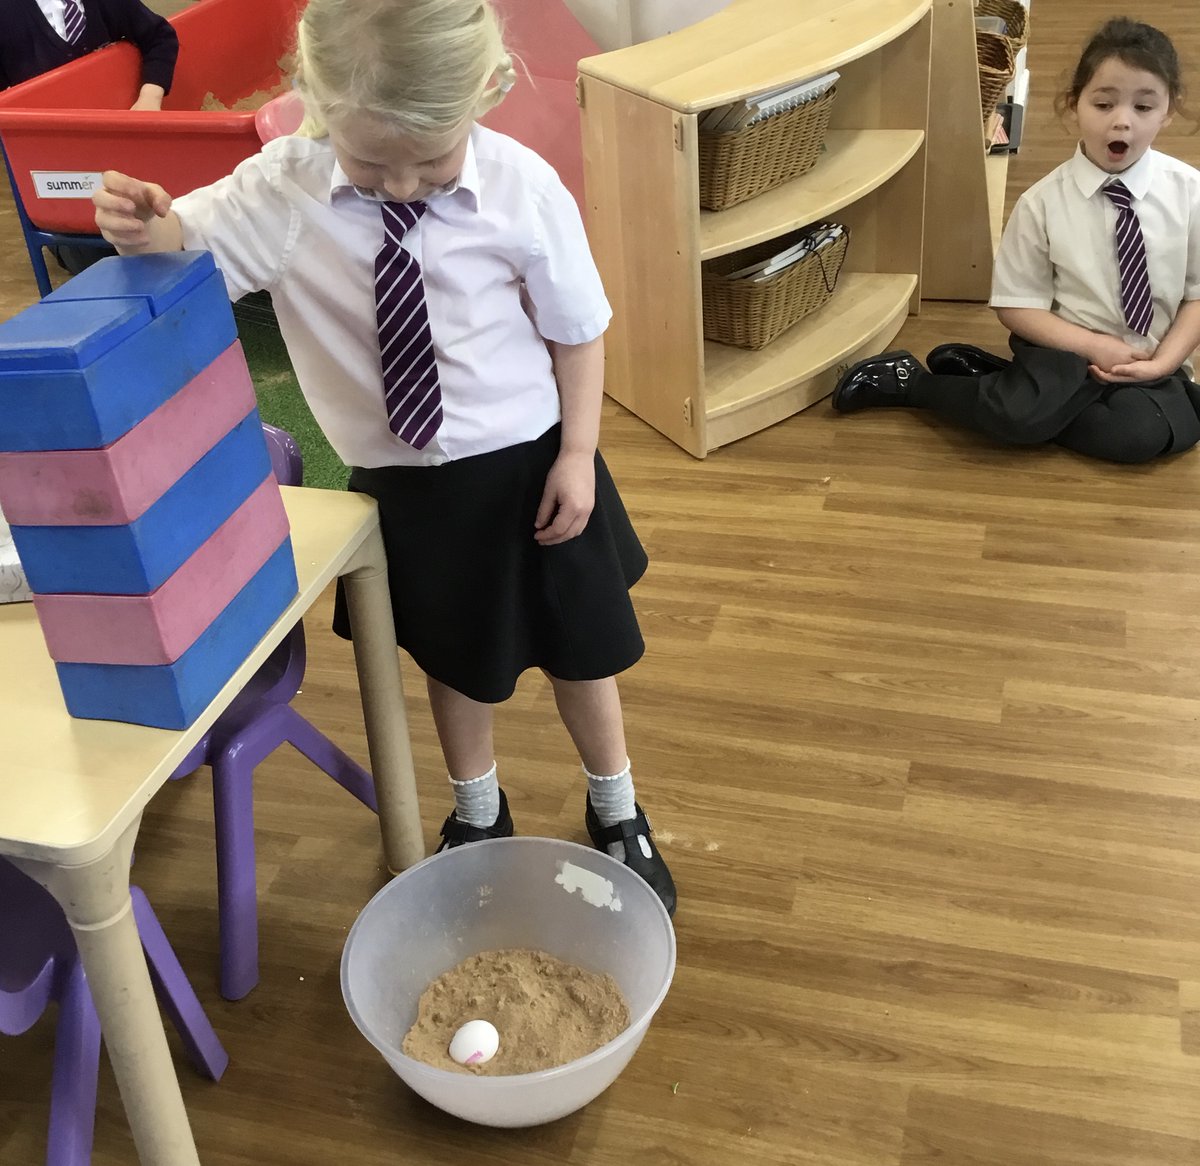 Reception class have loved being scientists this week! We did an experiment to help Humpty Dumpty's cousin, Numpty Bumpty, to test which materials will save him if he falls off the wall! #scienceweek #lovelearning